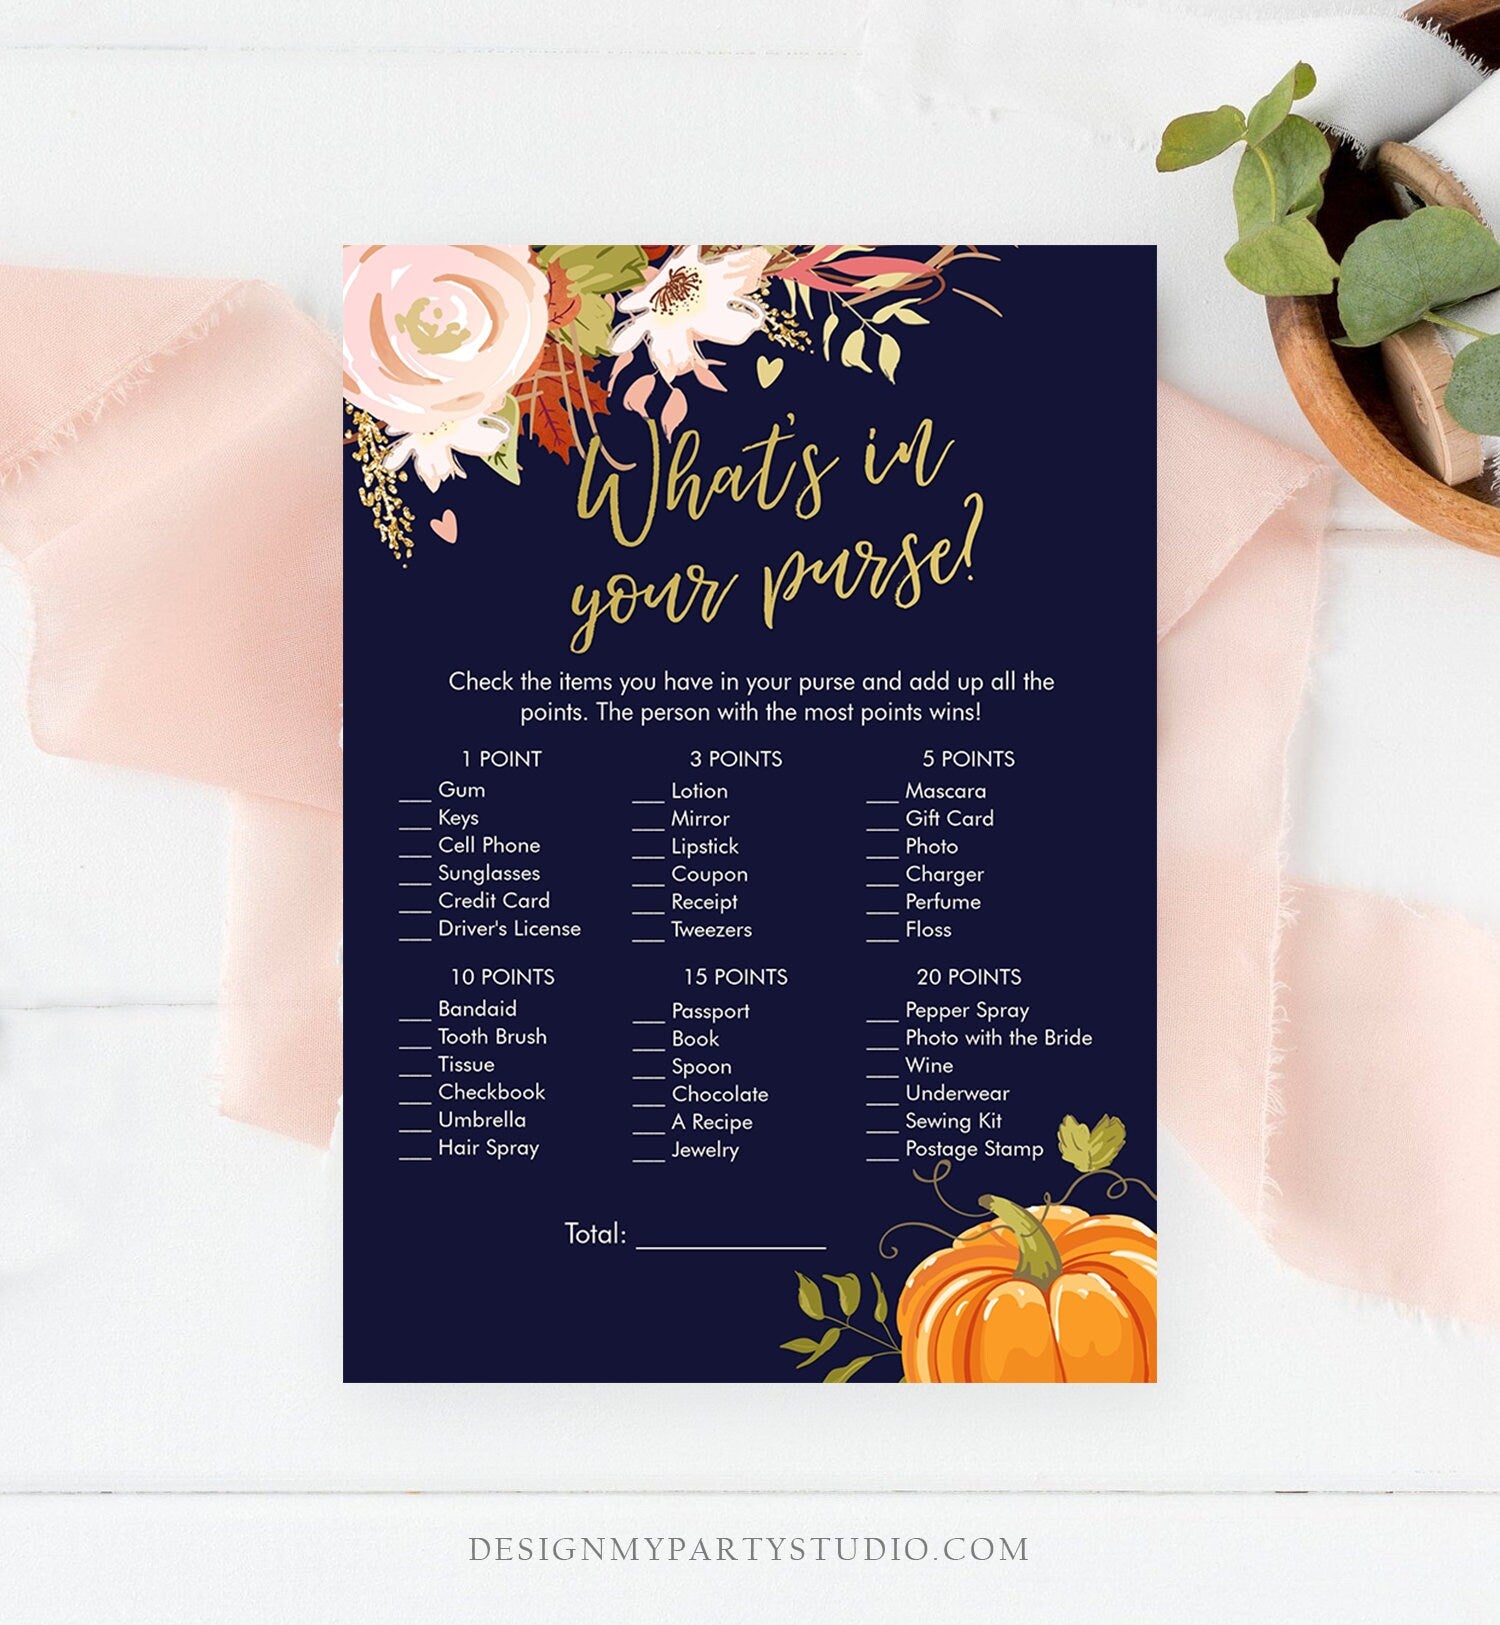 Editable What's in Your Purse Bridal Shower Game Fall in Love Autumn Pumpkin Floral Coed Wedding Activity Corjl Template Printable 0176